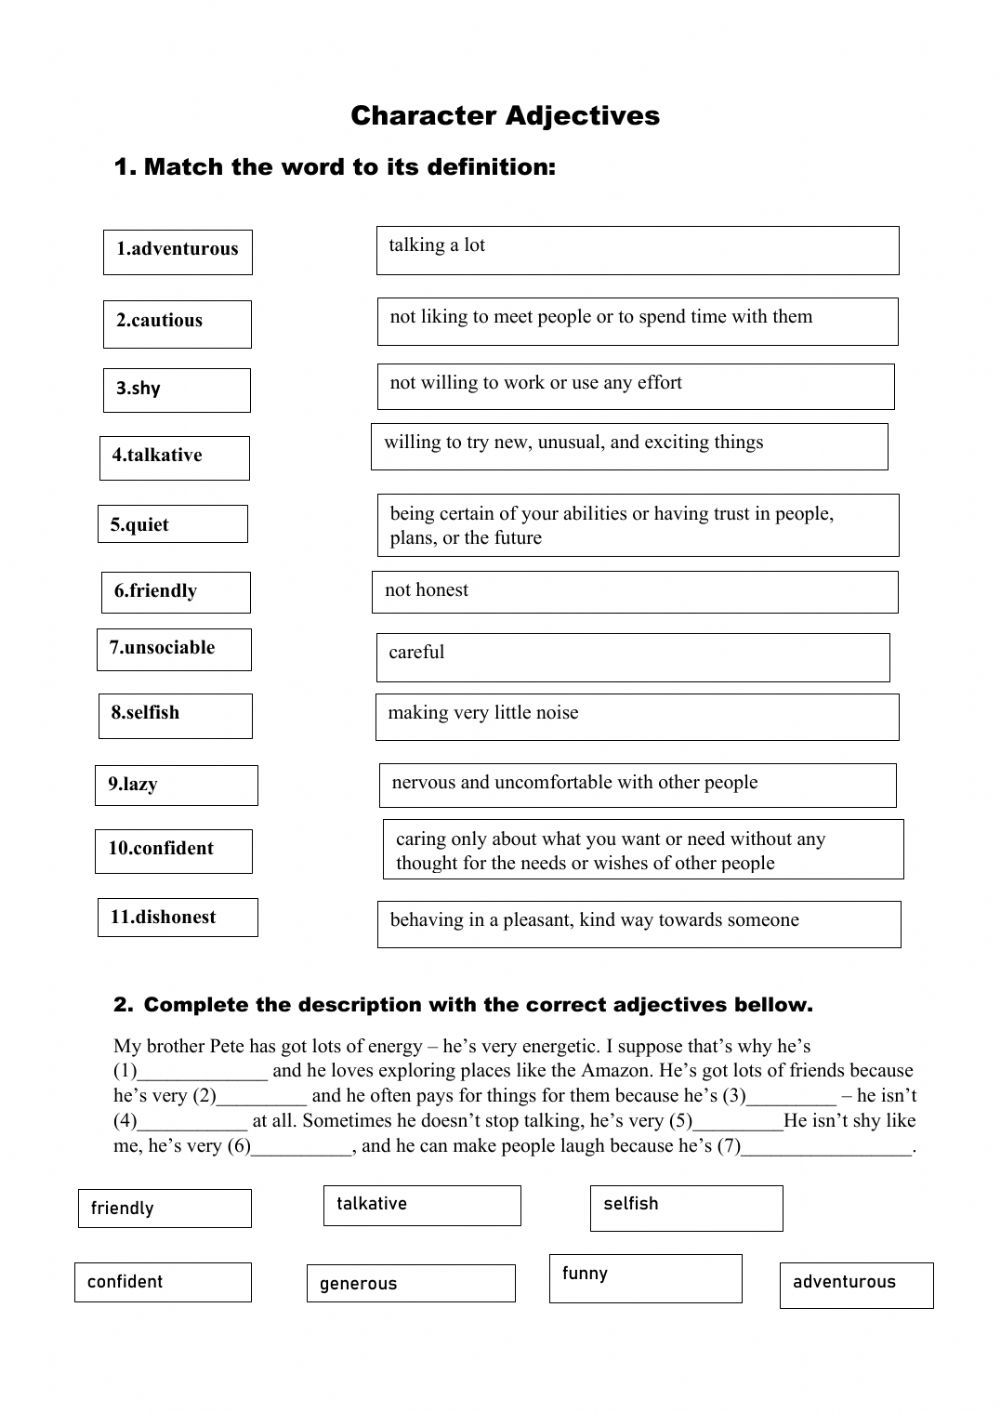 predicate-nominatives-and-predicate-adjectives-worksheet-answers-adjectiveworksheets